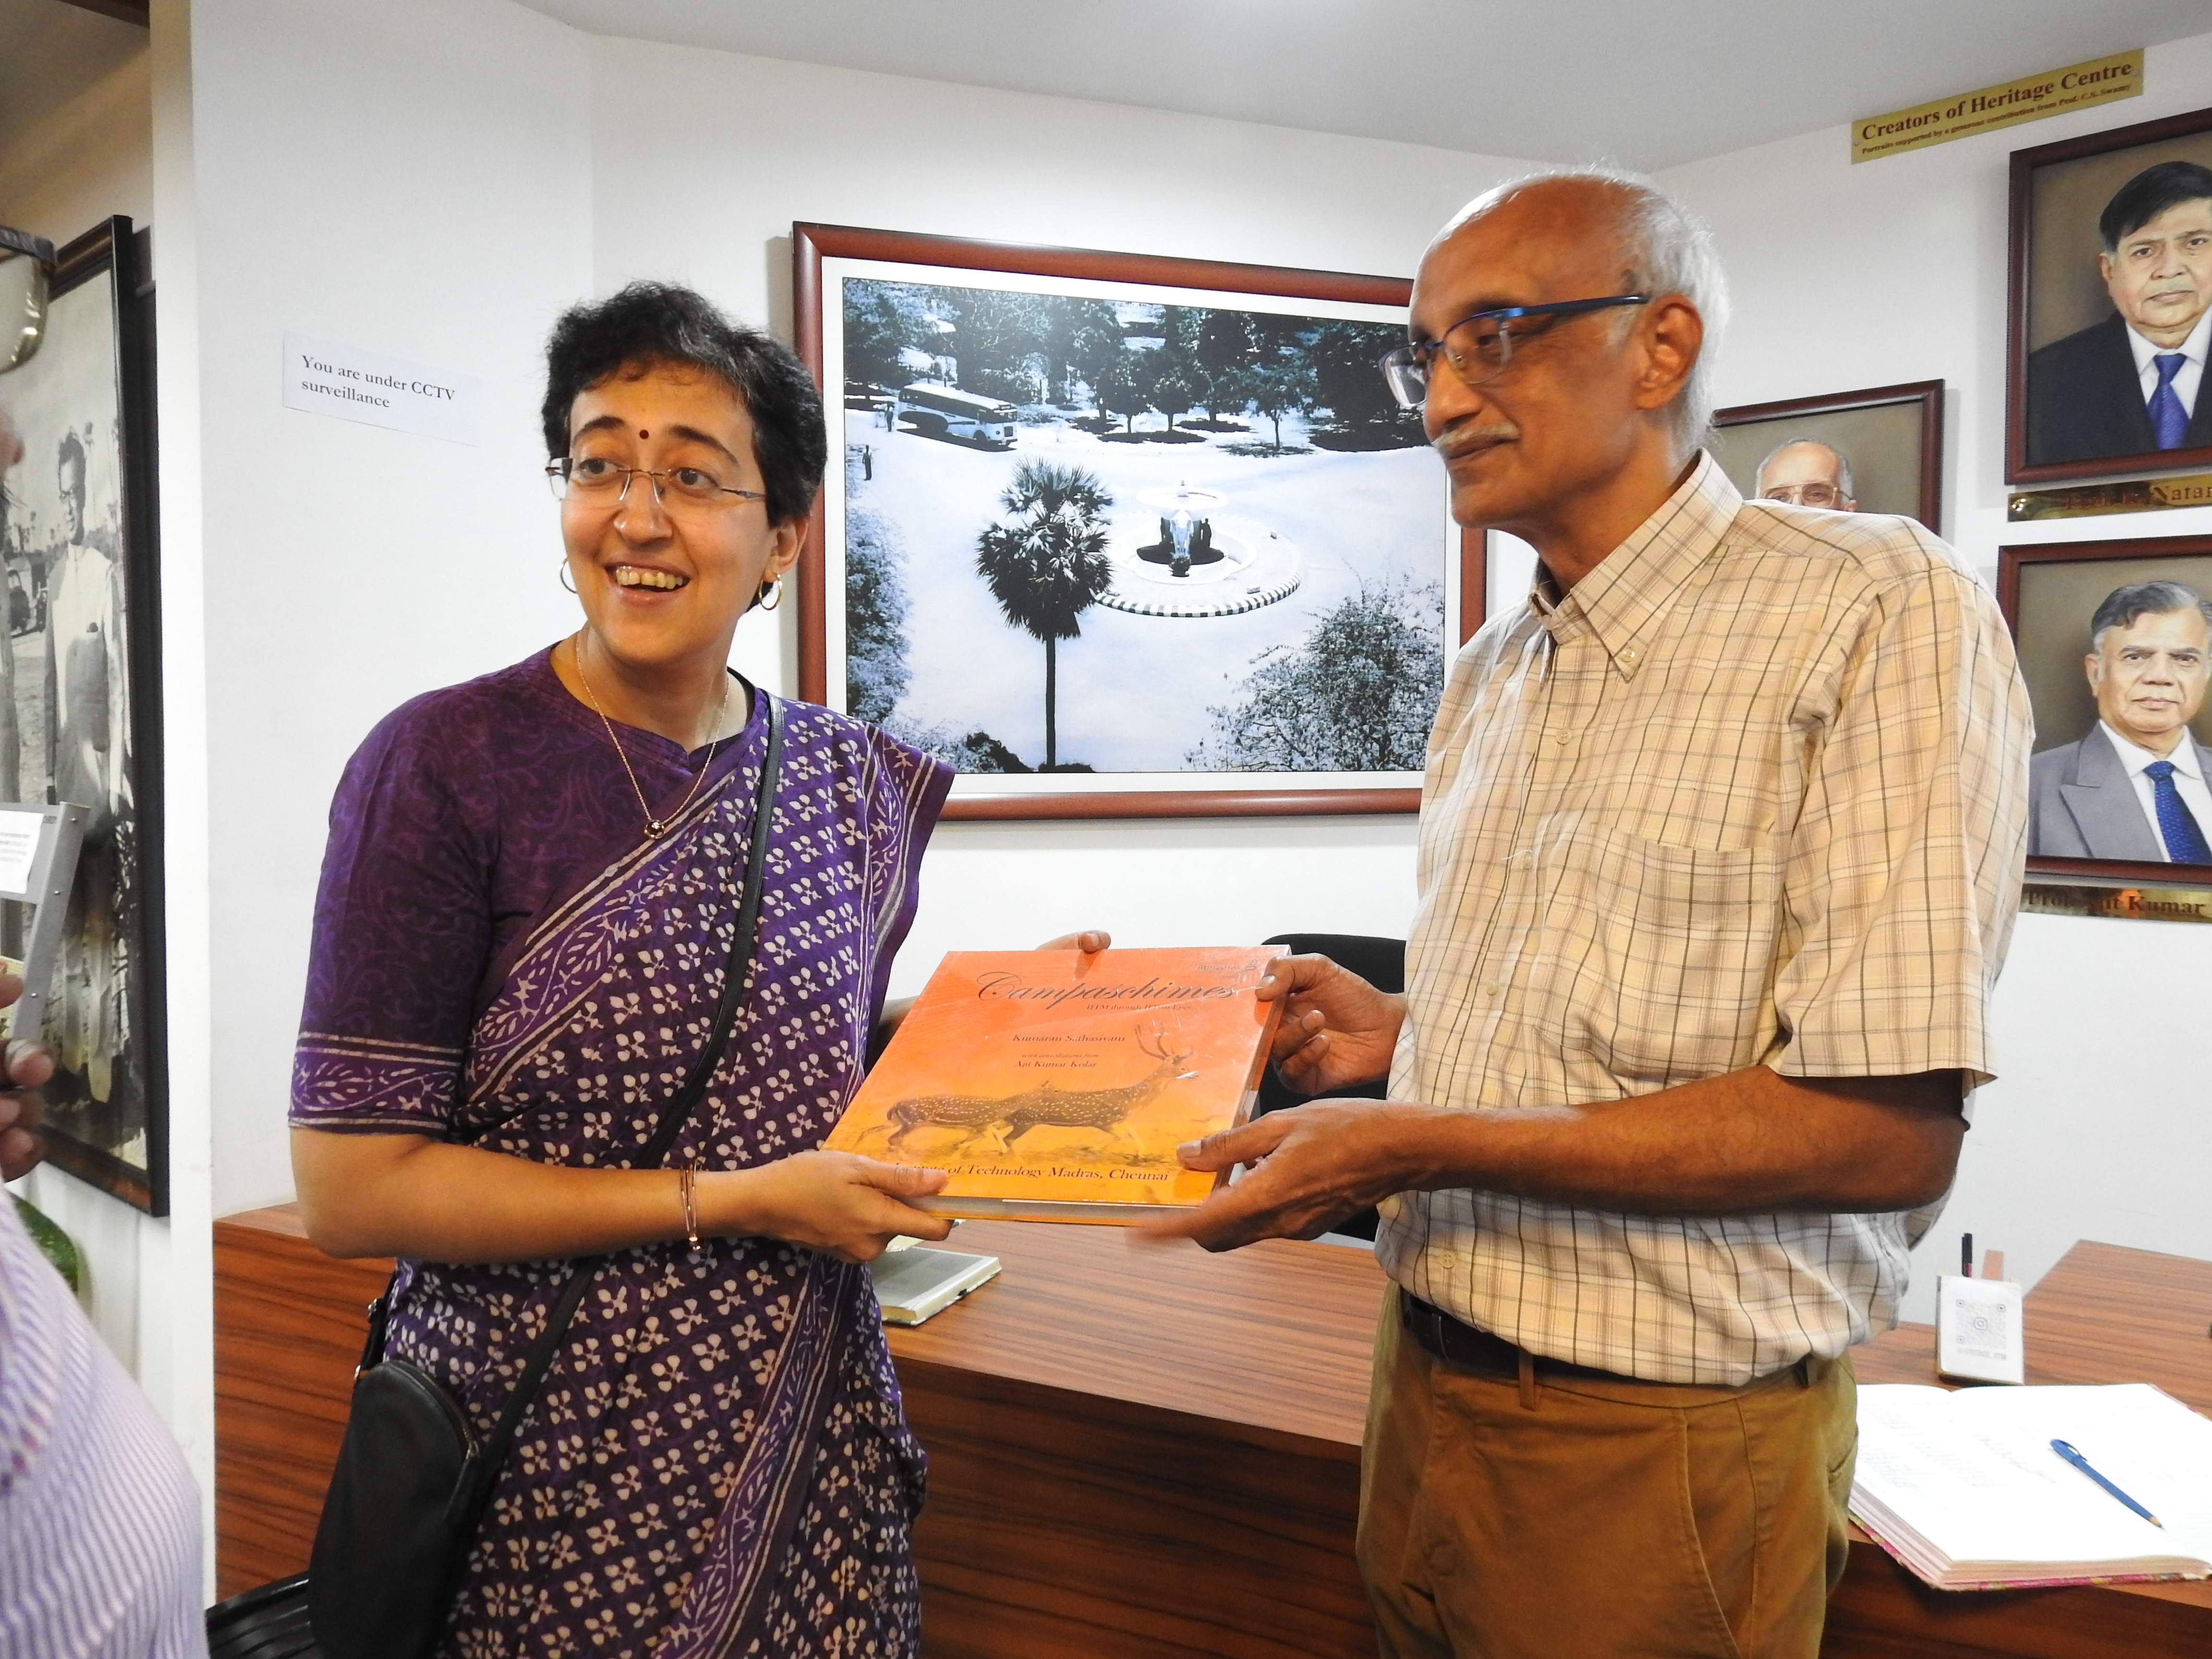 Prof. R. Nagarajan (Professor-in-charge of the Heritage Centre) presents a copy of Campaschimes to the minister